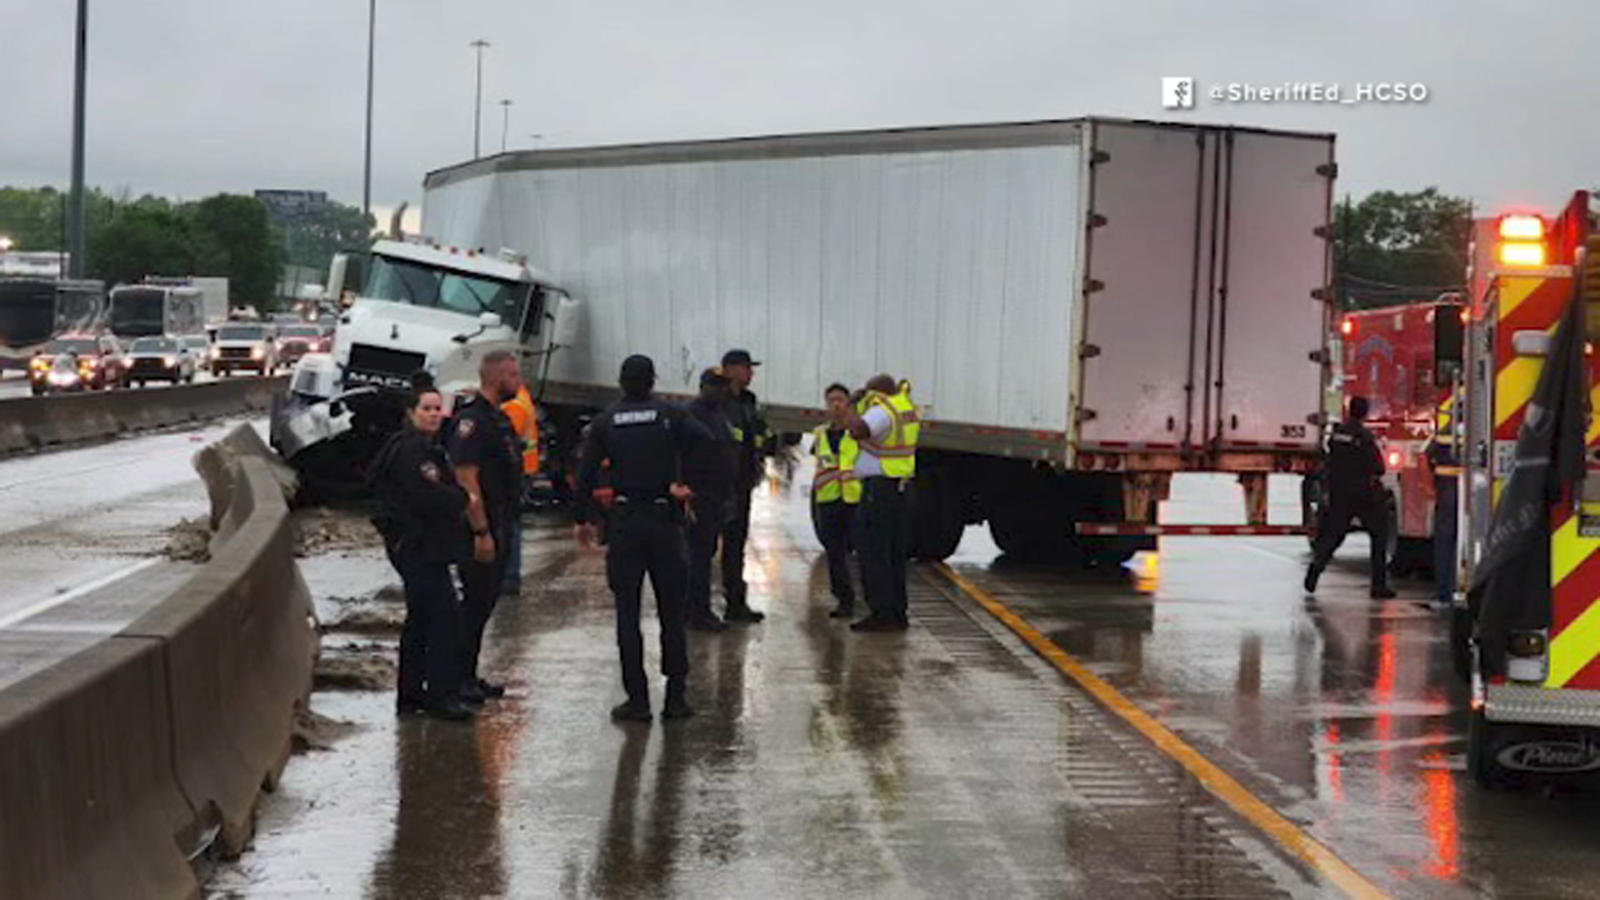 18-wheeler hydroplanes on Eastex Freeway due to severe weather across the Houston area